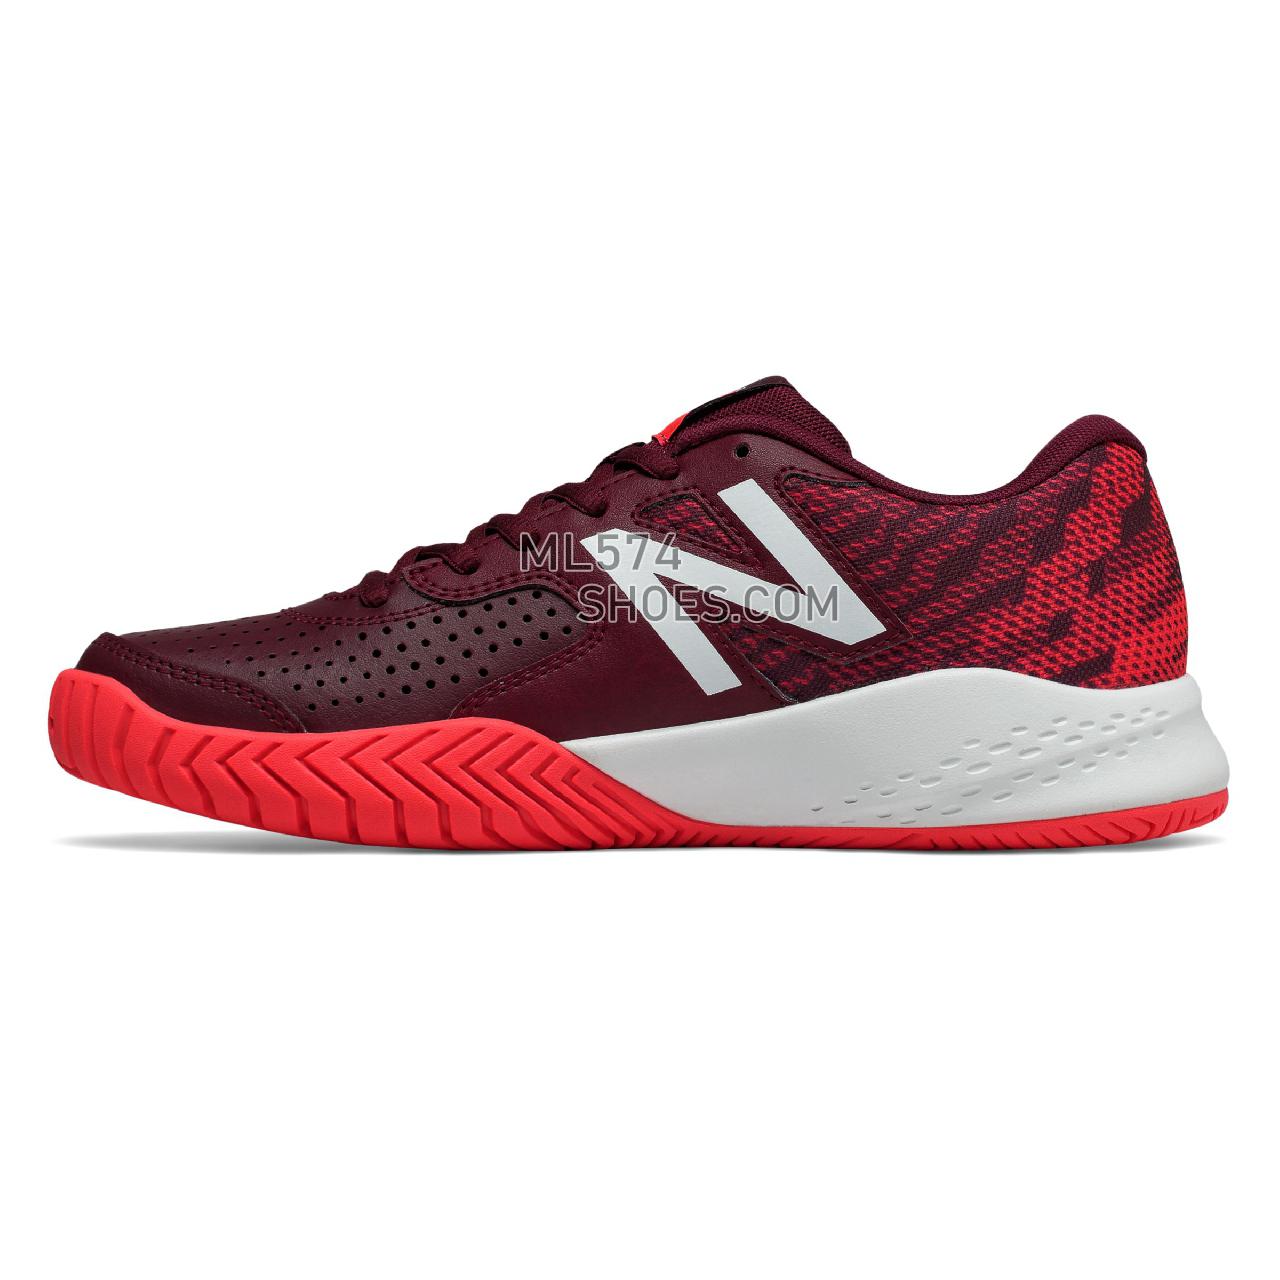 New Balance 696v3 - Women's 696 - Tennis / Court Oxblood with Vivid Coral - WCH696O3